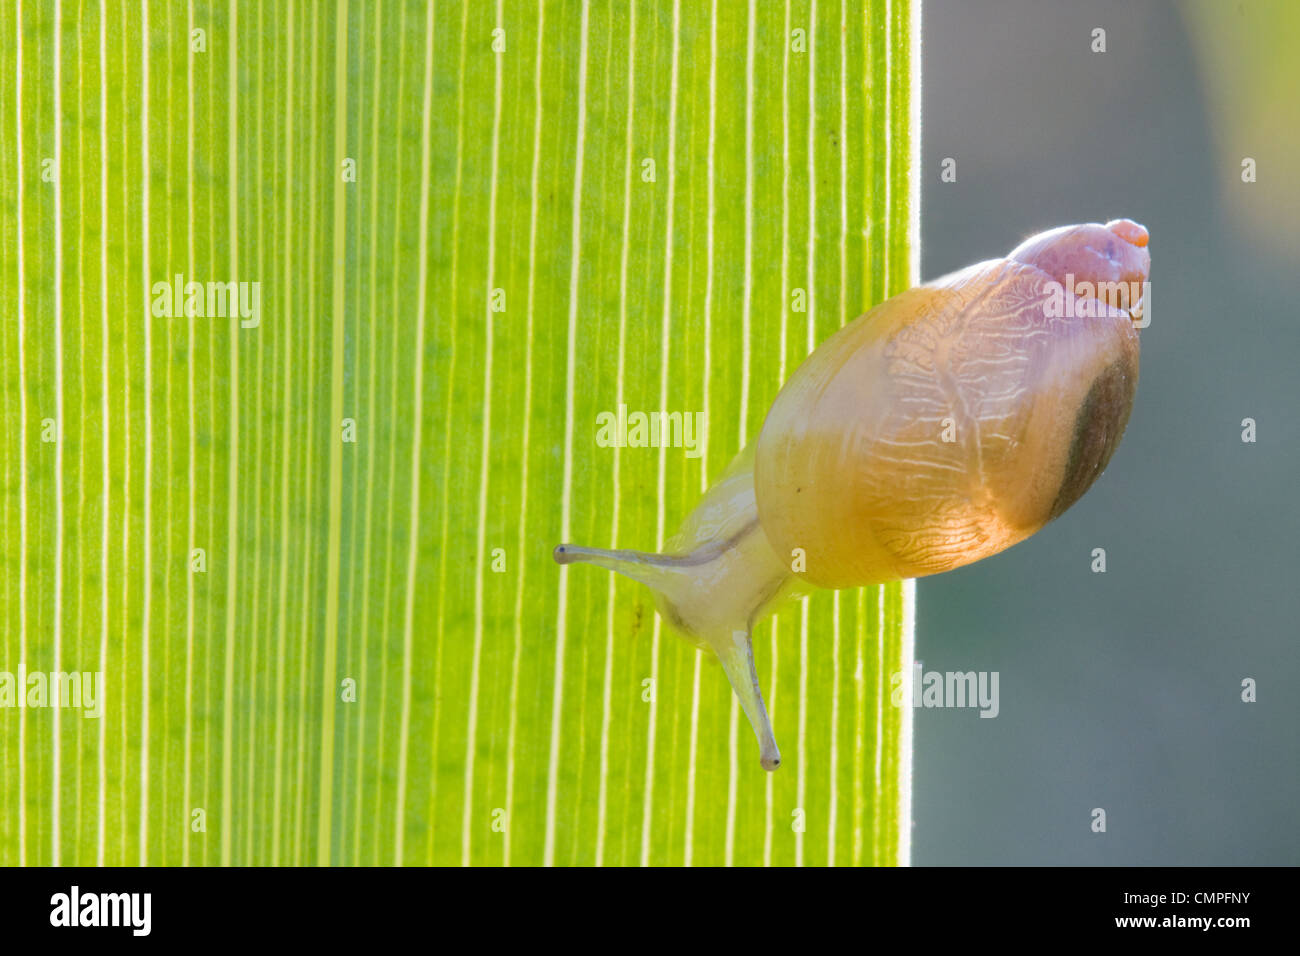 Young snail on the leaf of a Yellow Iris Stock Photo